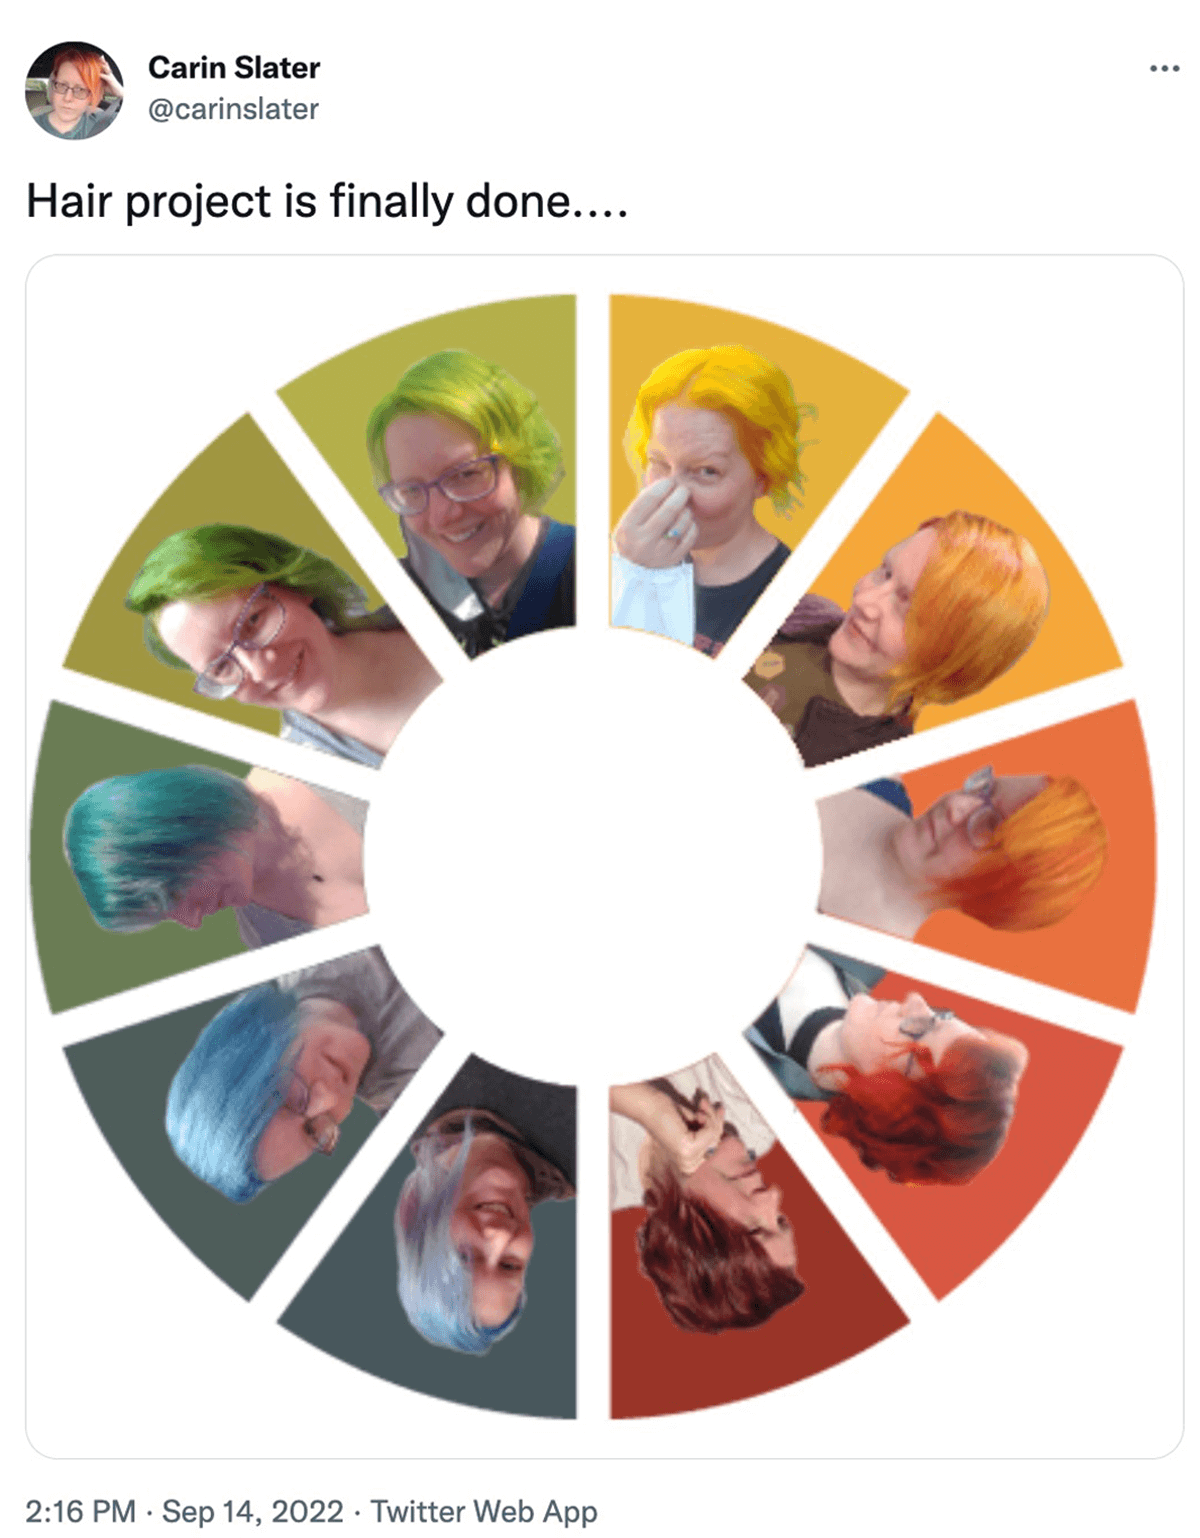 @carinslater on twitter: Hair project is finally done... Me with all my fun hair colors matching the colors in the Litmus logo.